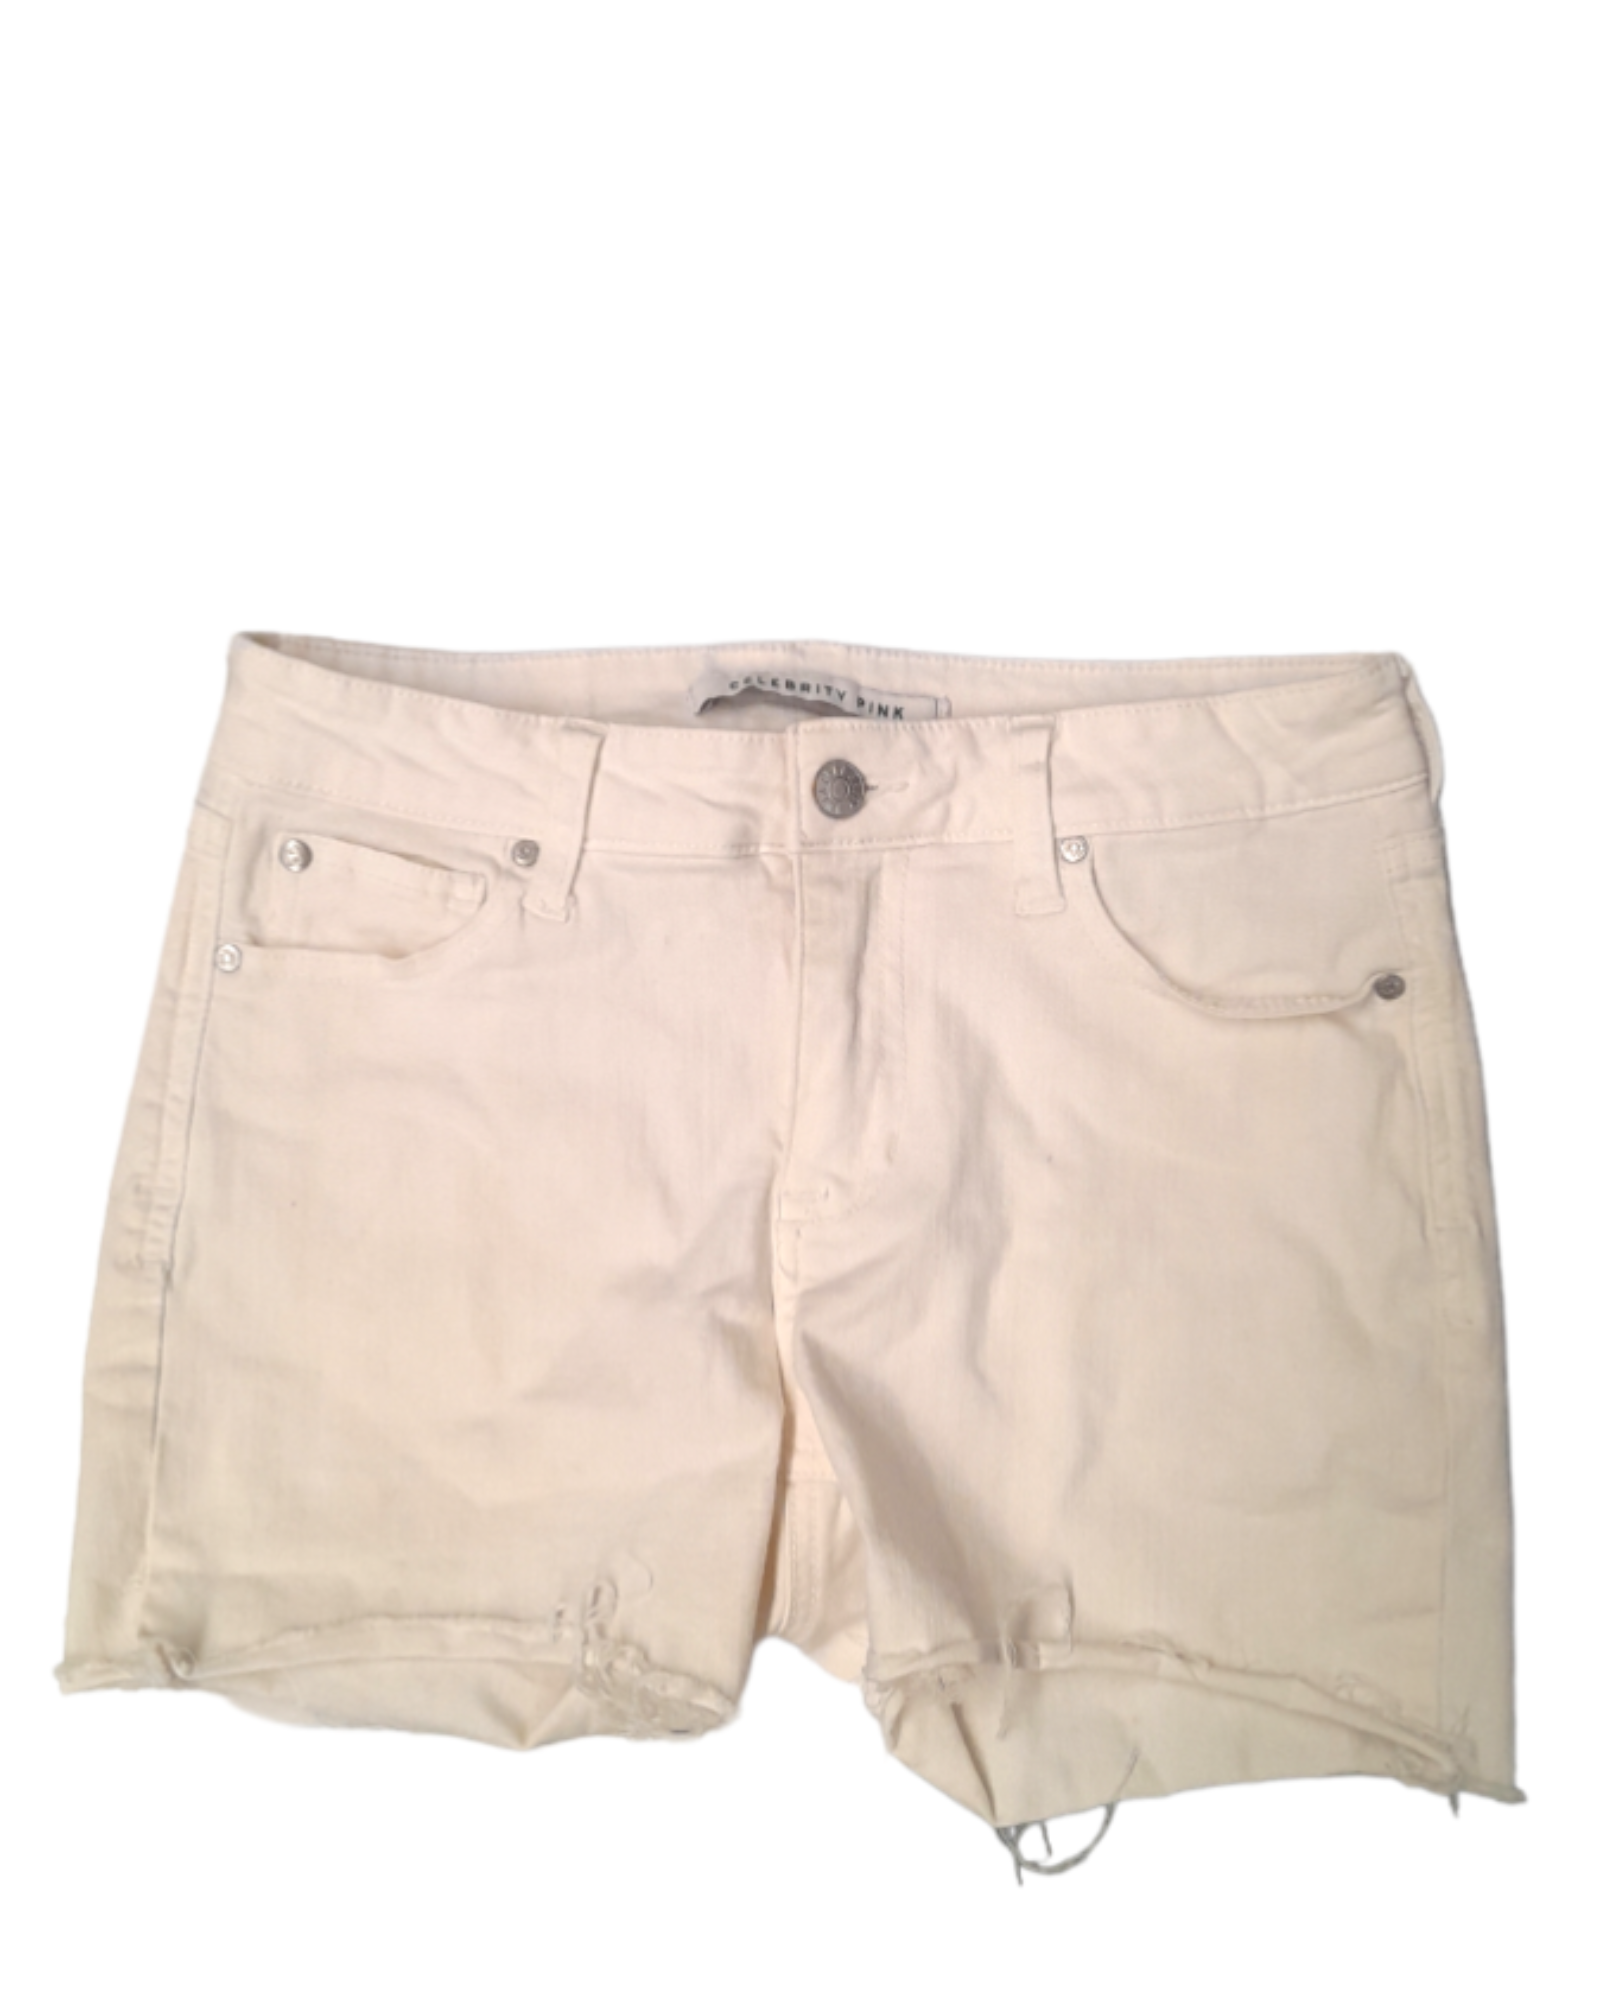 Shorts Casuales Celebrity Pink